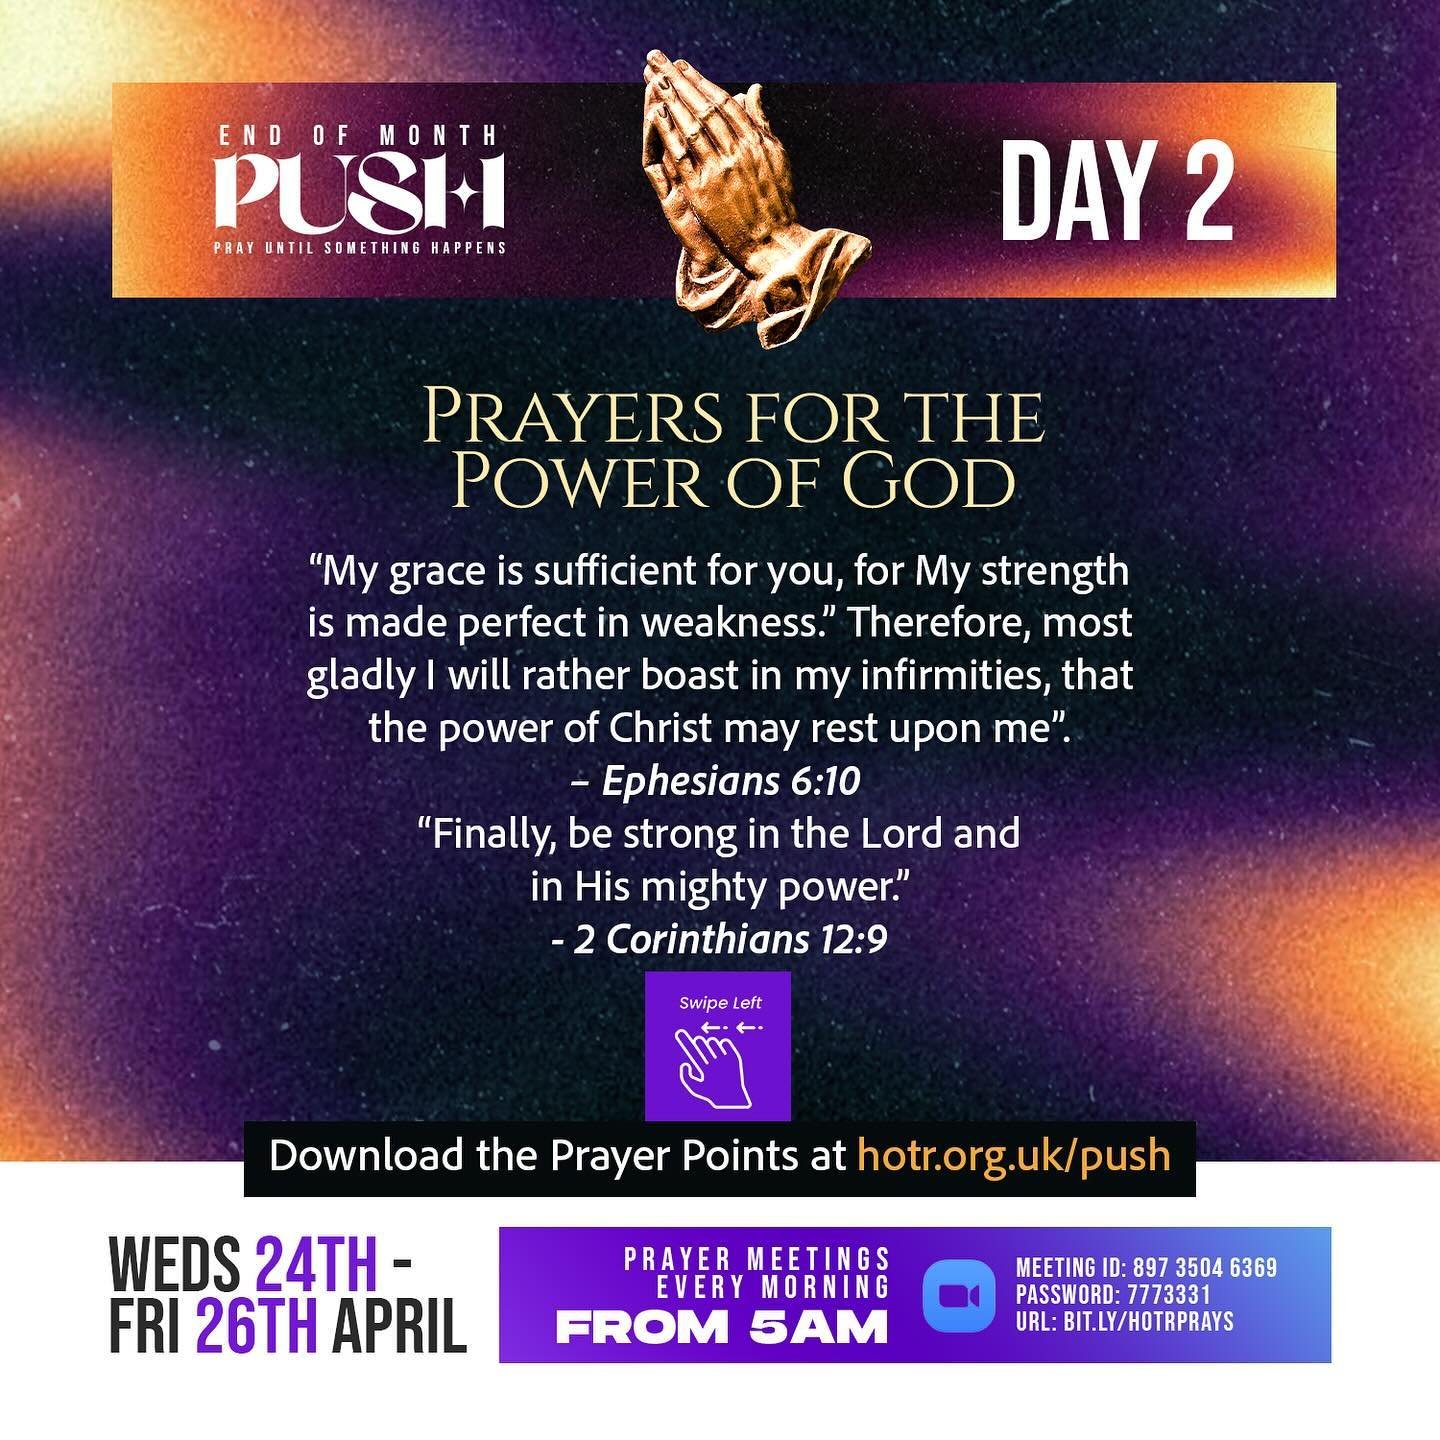 Day 2 of P.U.S.H Prayers

Join us as when we fast, we are not like the hypocrites, with a sad countenance. For they disfigure their faces that they may appear to men to be fasting. Assuredly, they have their reward. But, when we fast, we anoint our h